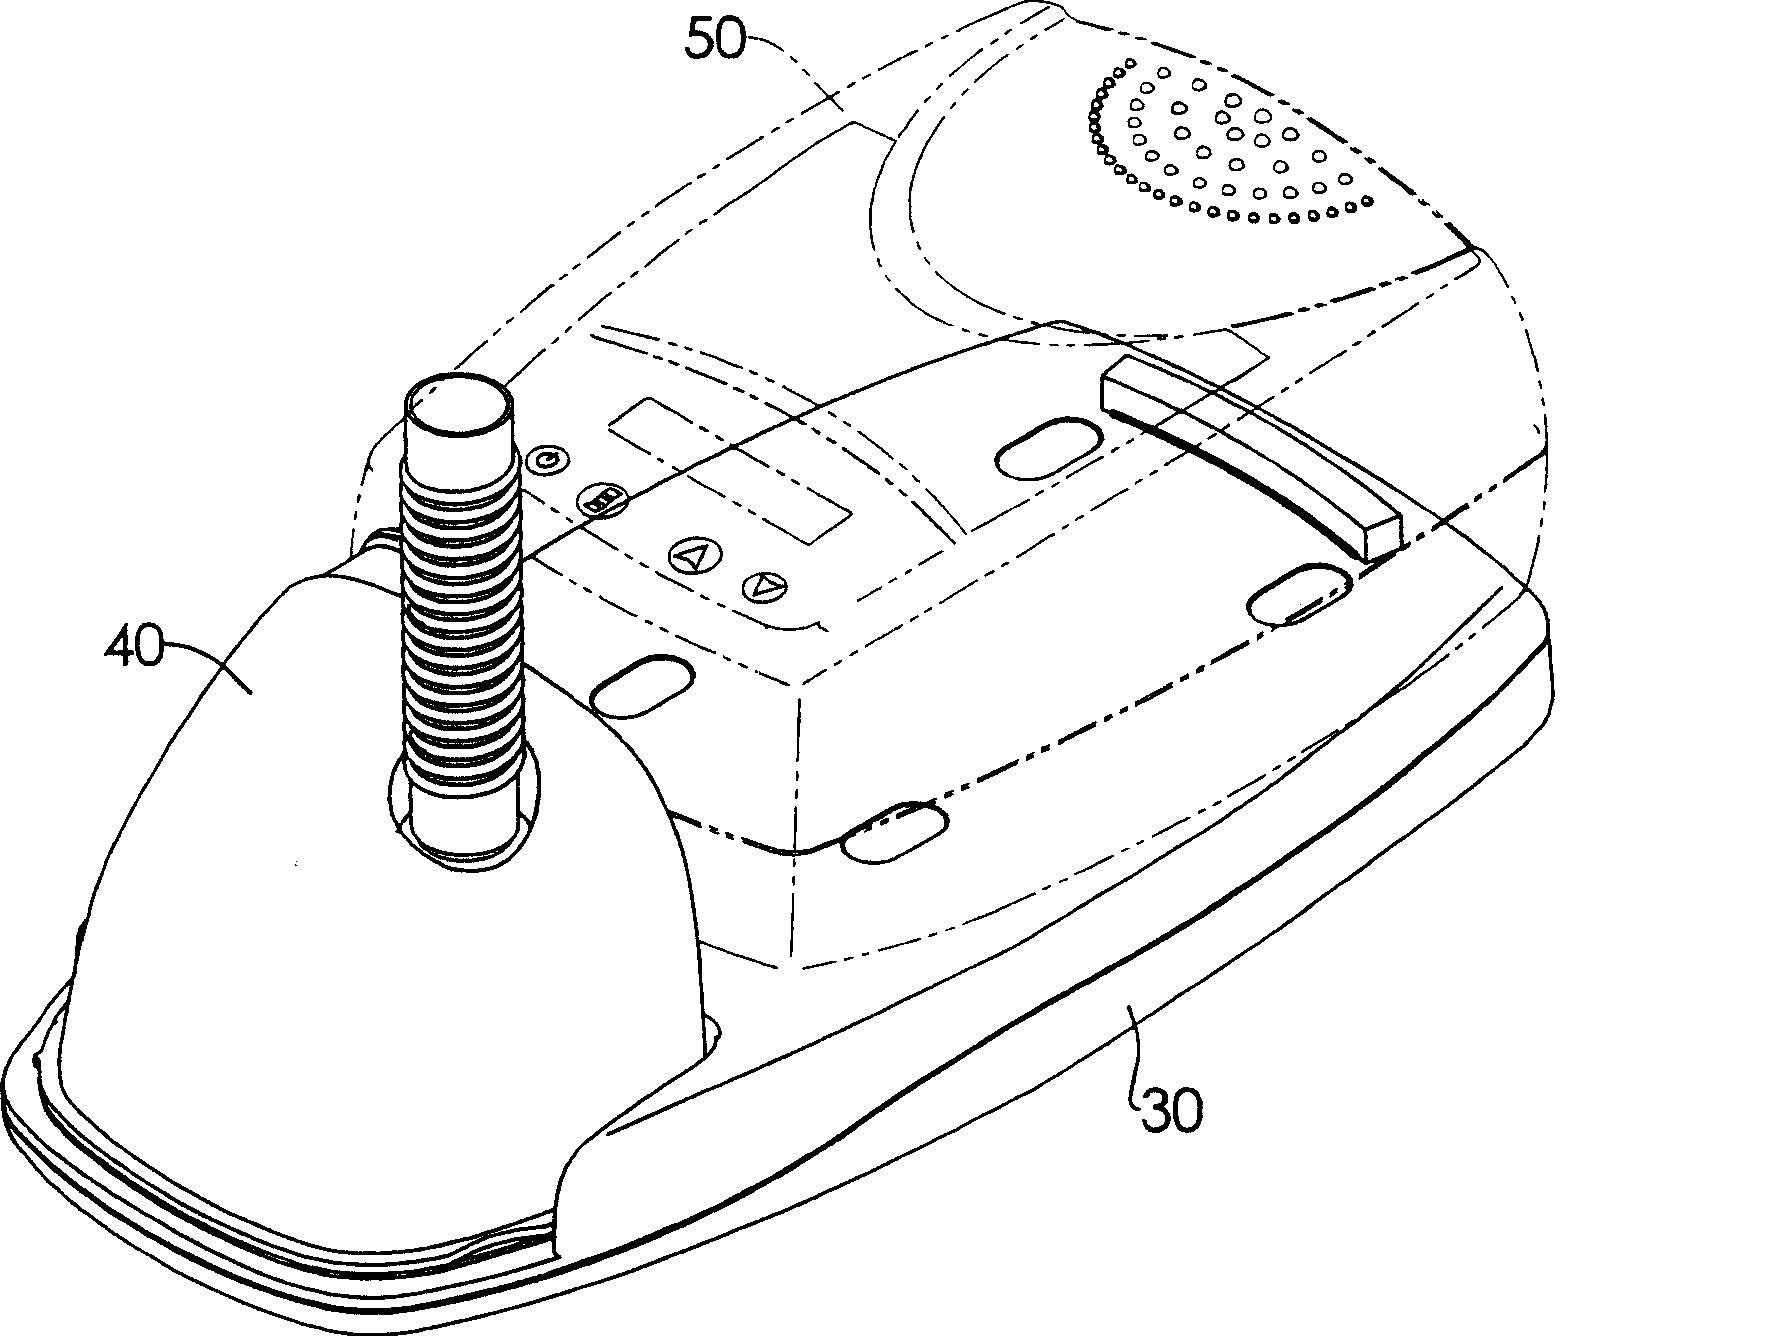 Warming disk assembly of respiration therapeutic equipment